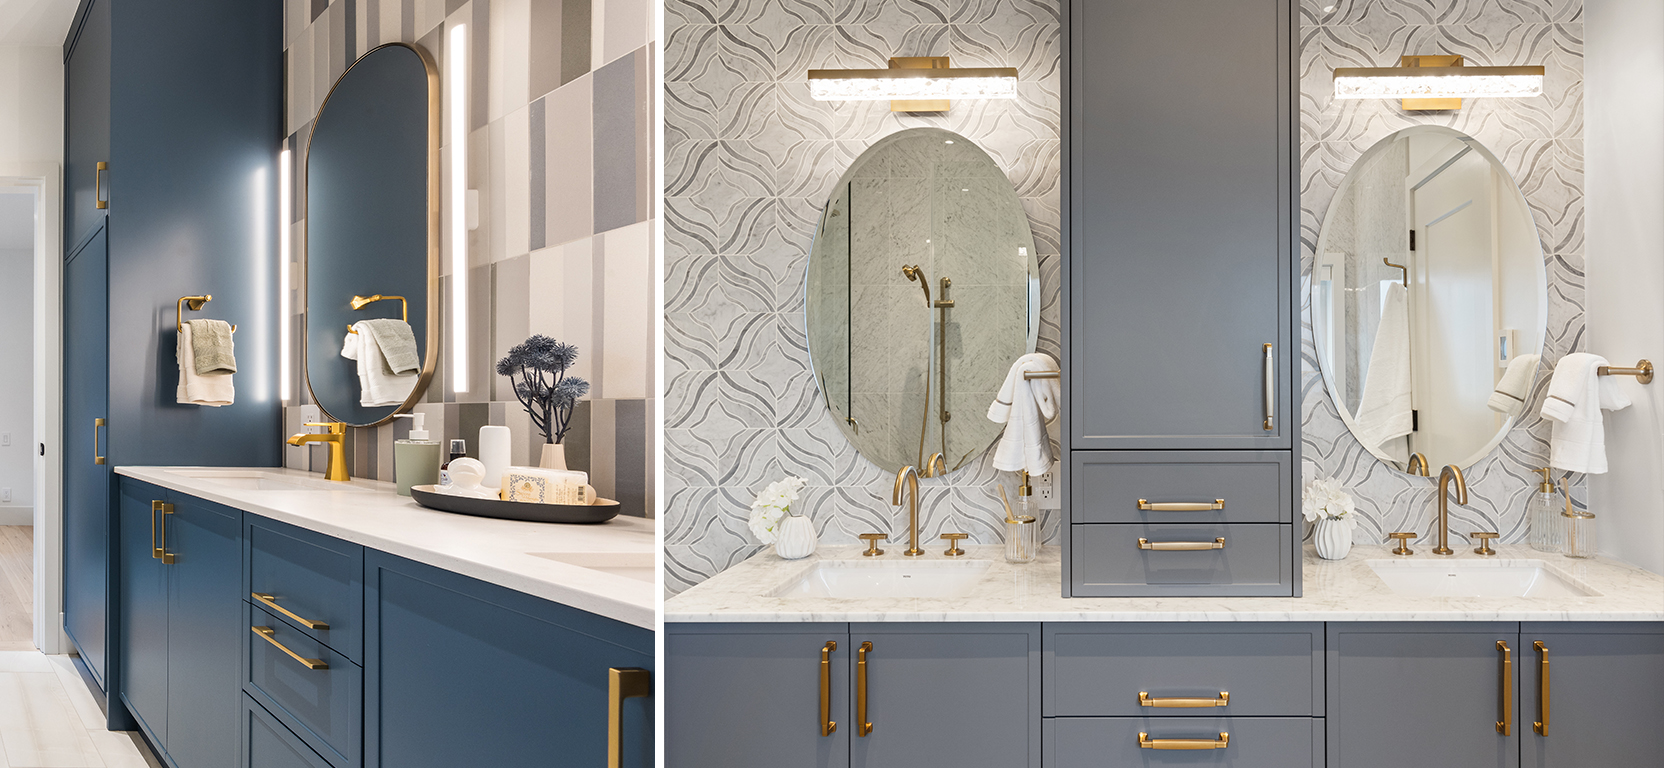 Residential bathroom vanity spaces with rounded mirrors, painted cabinetry, metallic hardware and patterned wallpaper.